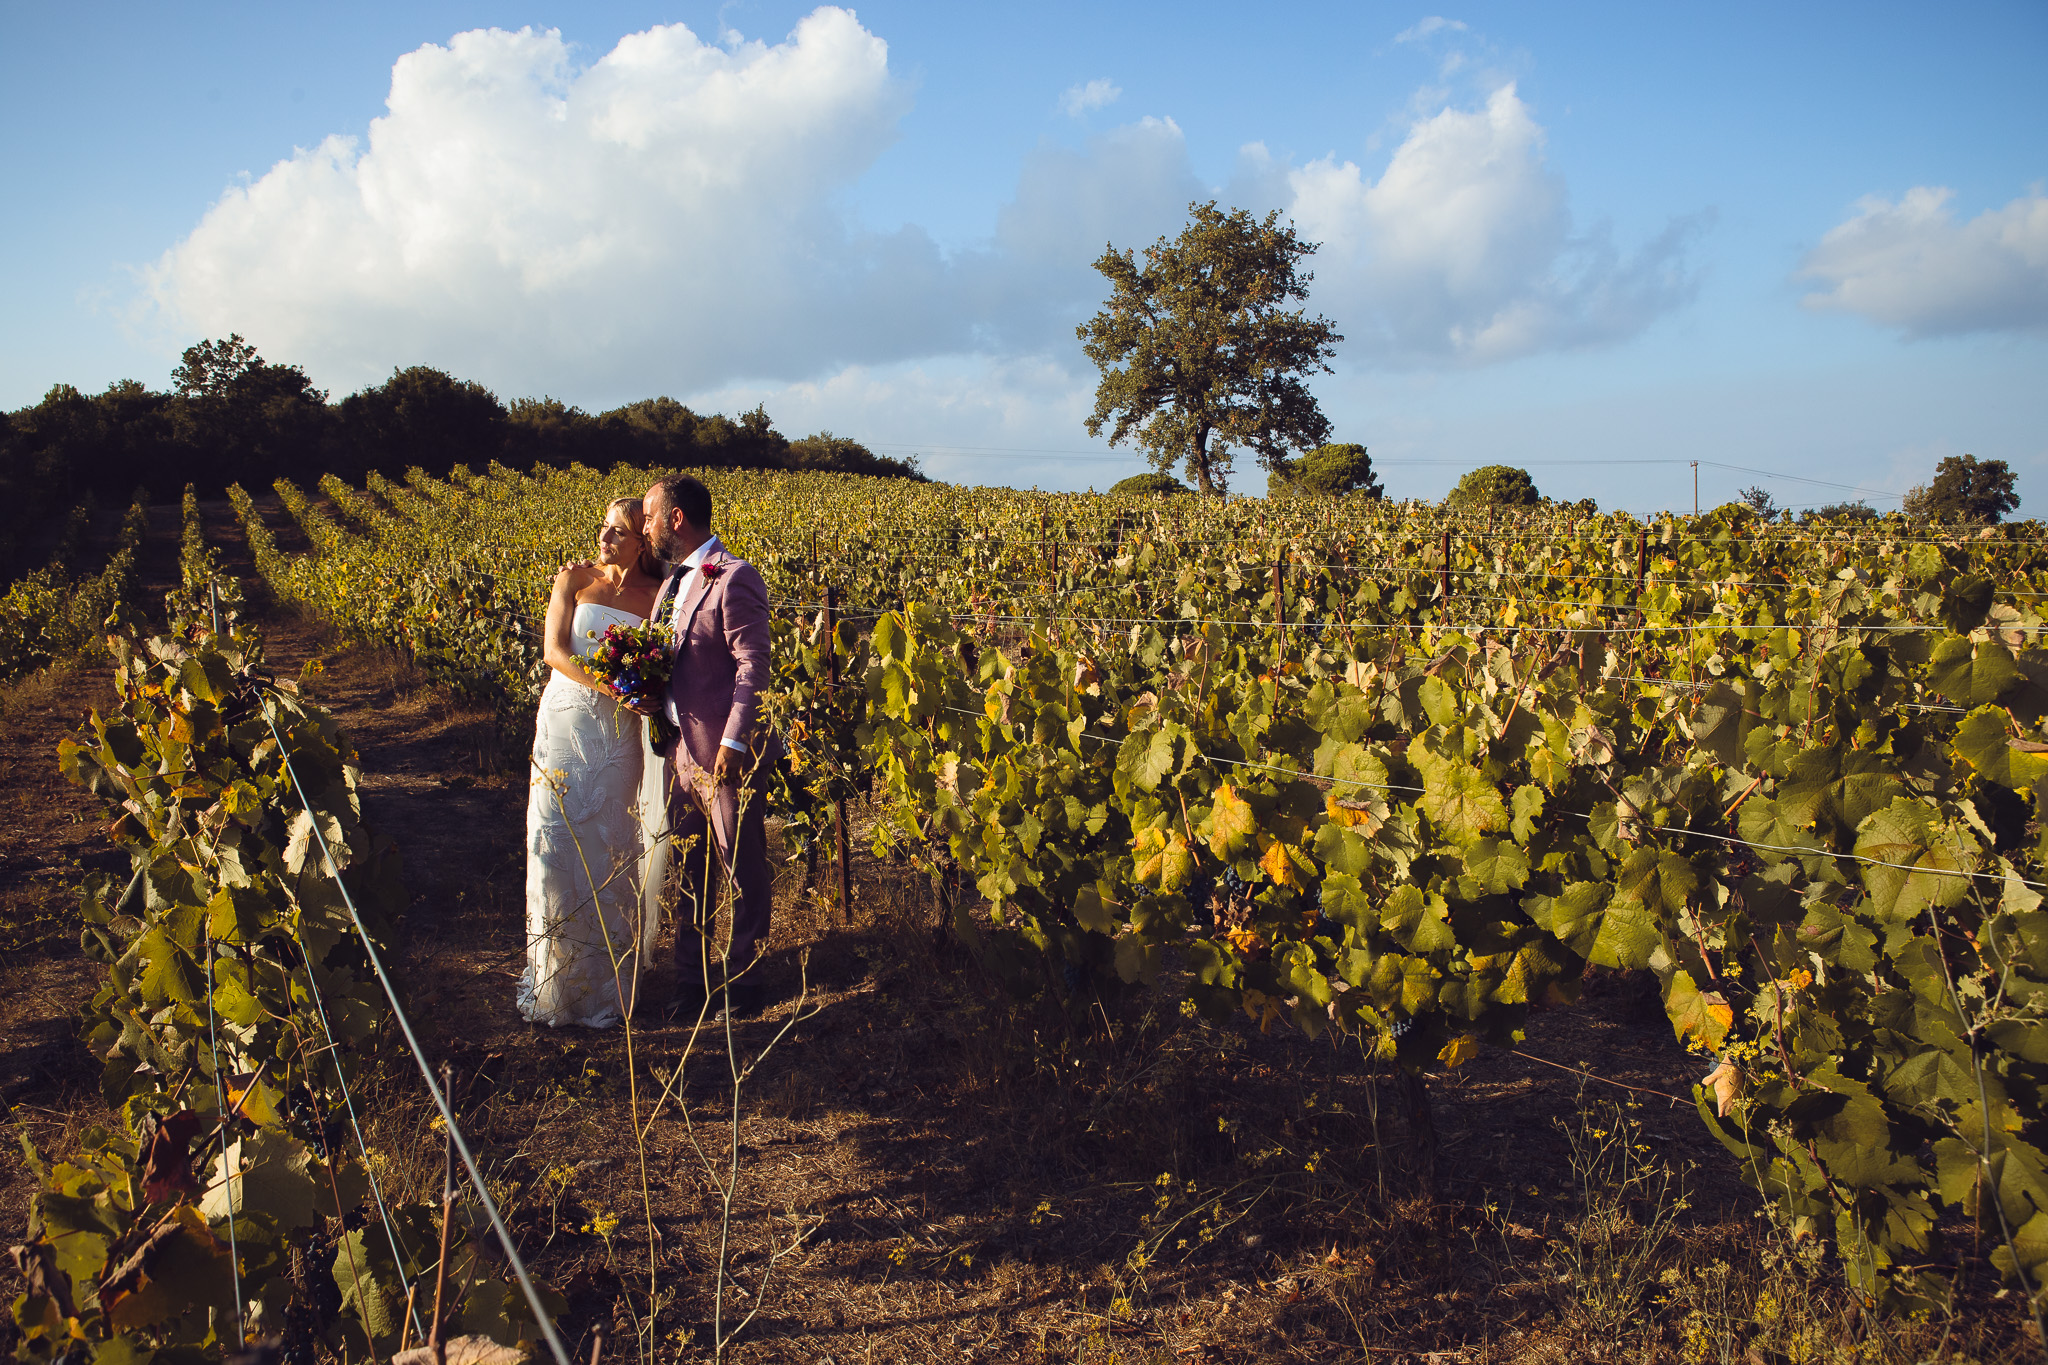 Alice and Tom stand together in the vineyard and pose for a couples portrait at their destination wedding